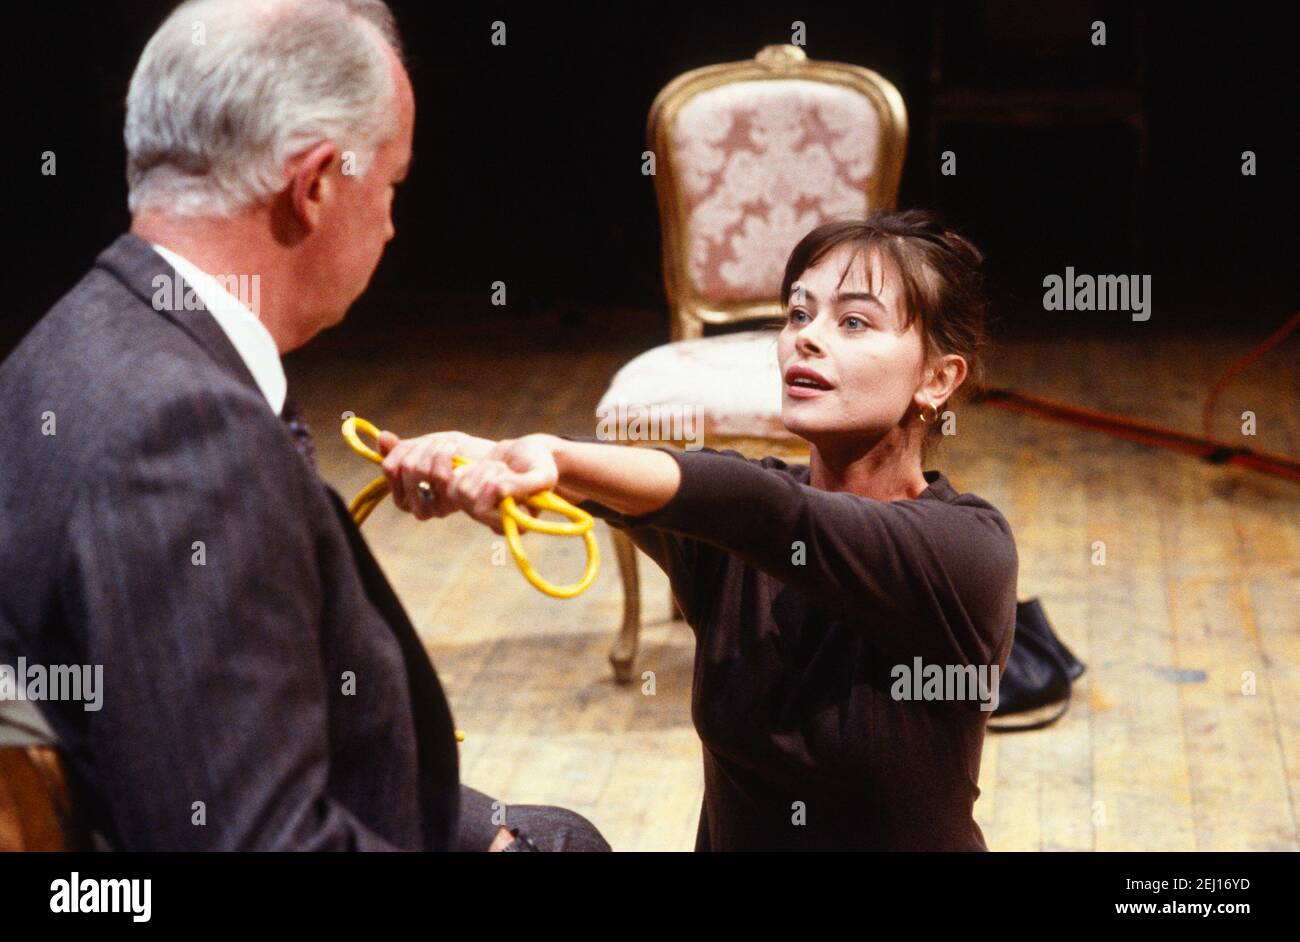 David Calder (Larry Palmer), Polly Walker (Charity Luber) in H.I.D. (Hess is Dead) by Howard Brenton at the Almeida Theatre, London N1  28/09/1989  a Royal Shakespeare Company (RSC) production  design: Eryl Ellis & Kenny MacLellan  lighting: Geraint Pughe  director: Danny Boyle Stock Photo